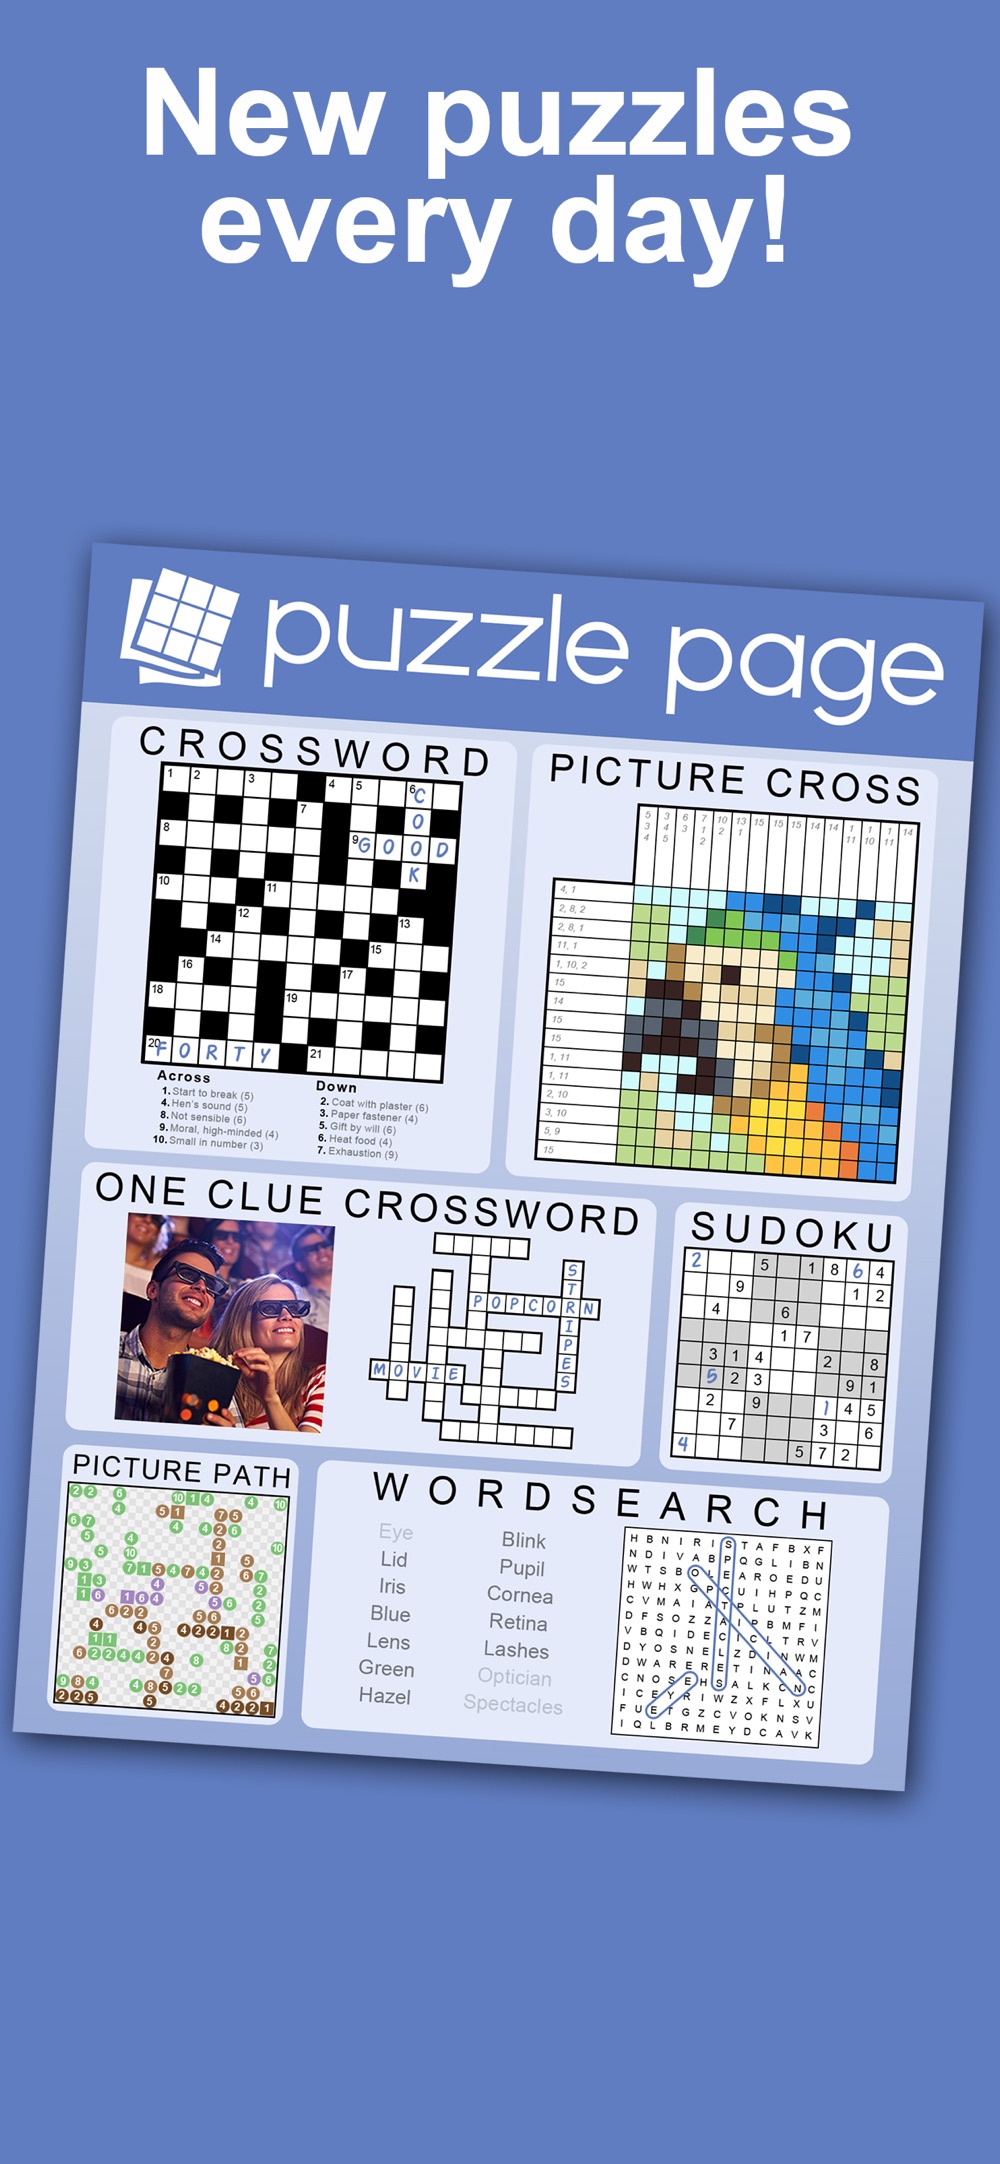 Puzzle Page – Daily Puzzles!